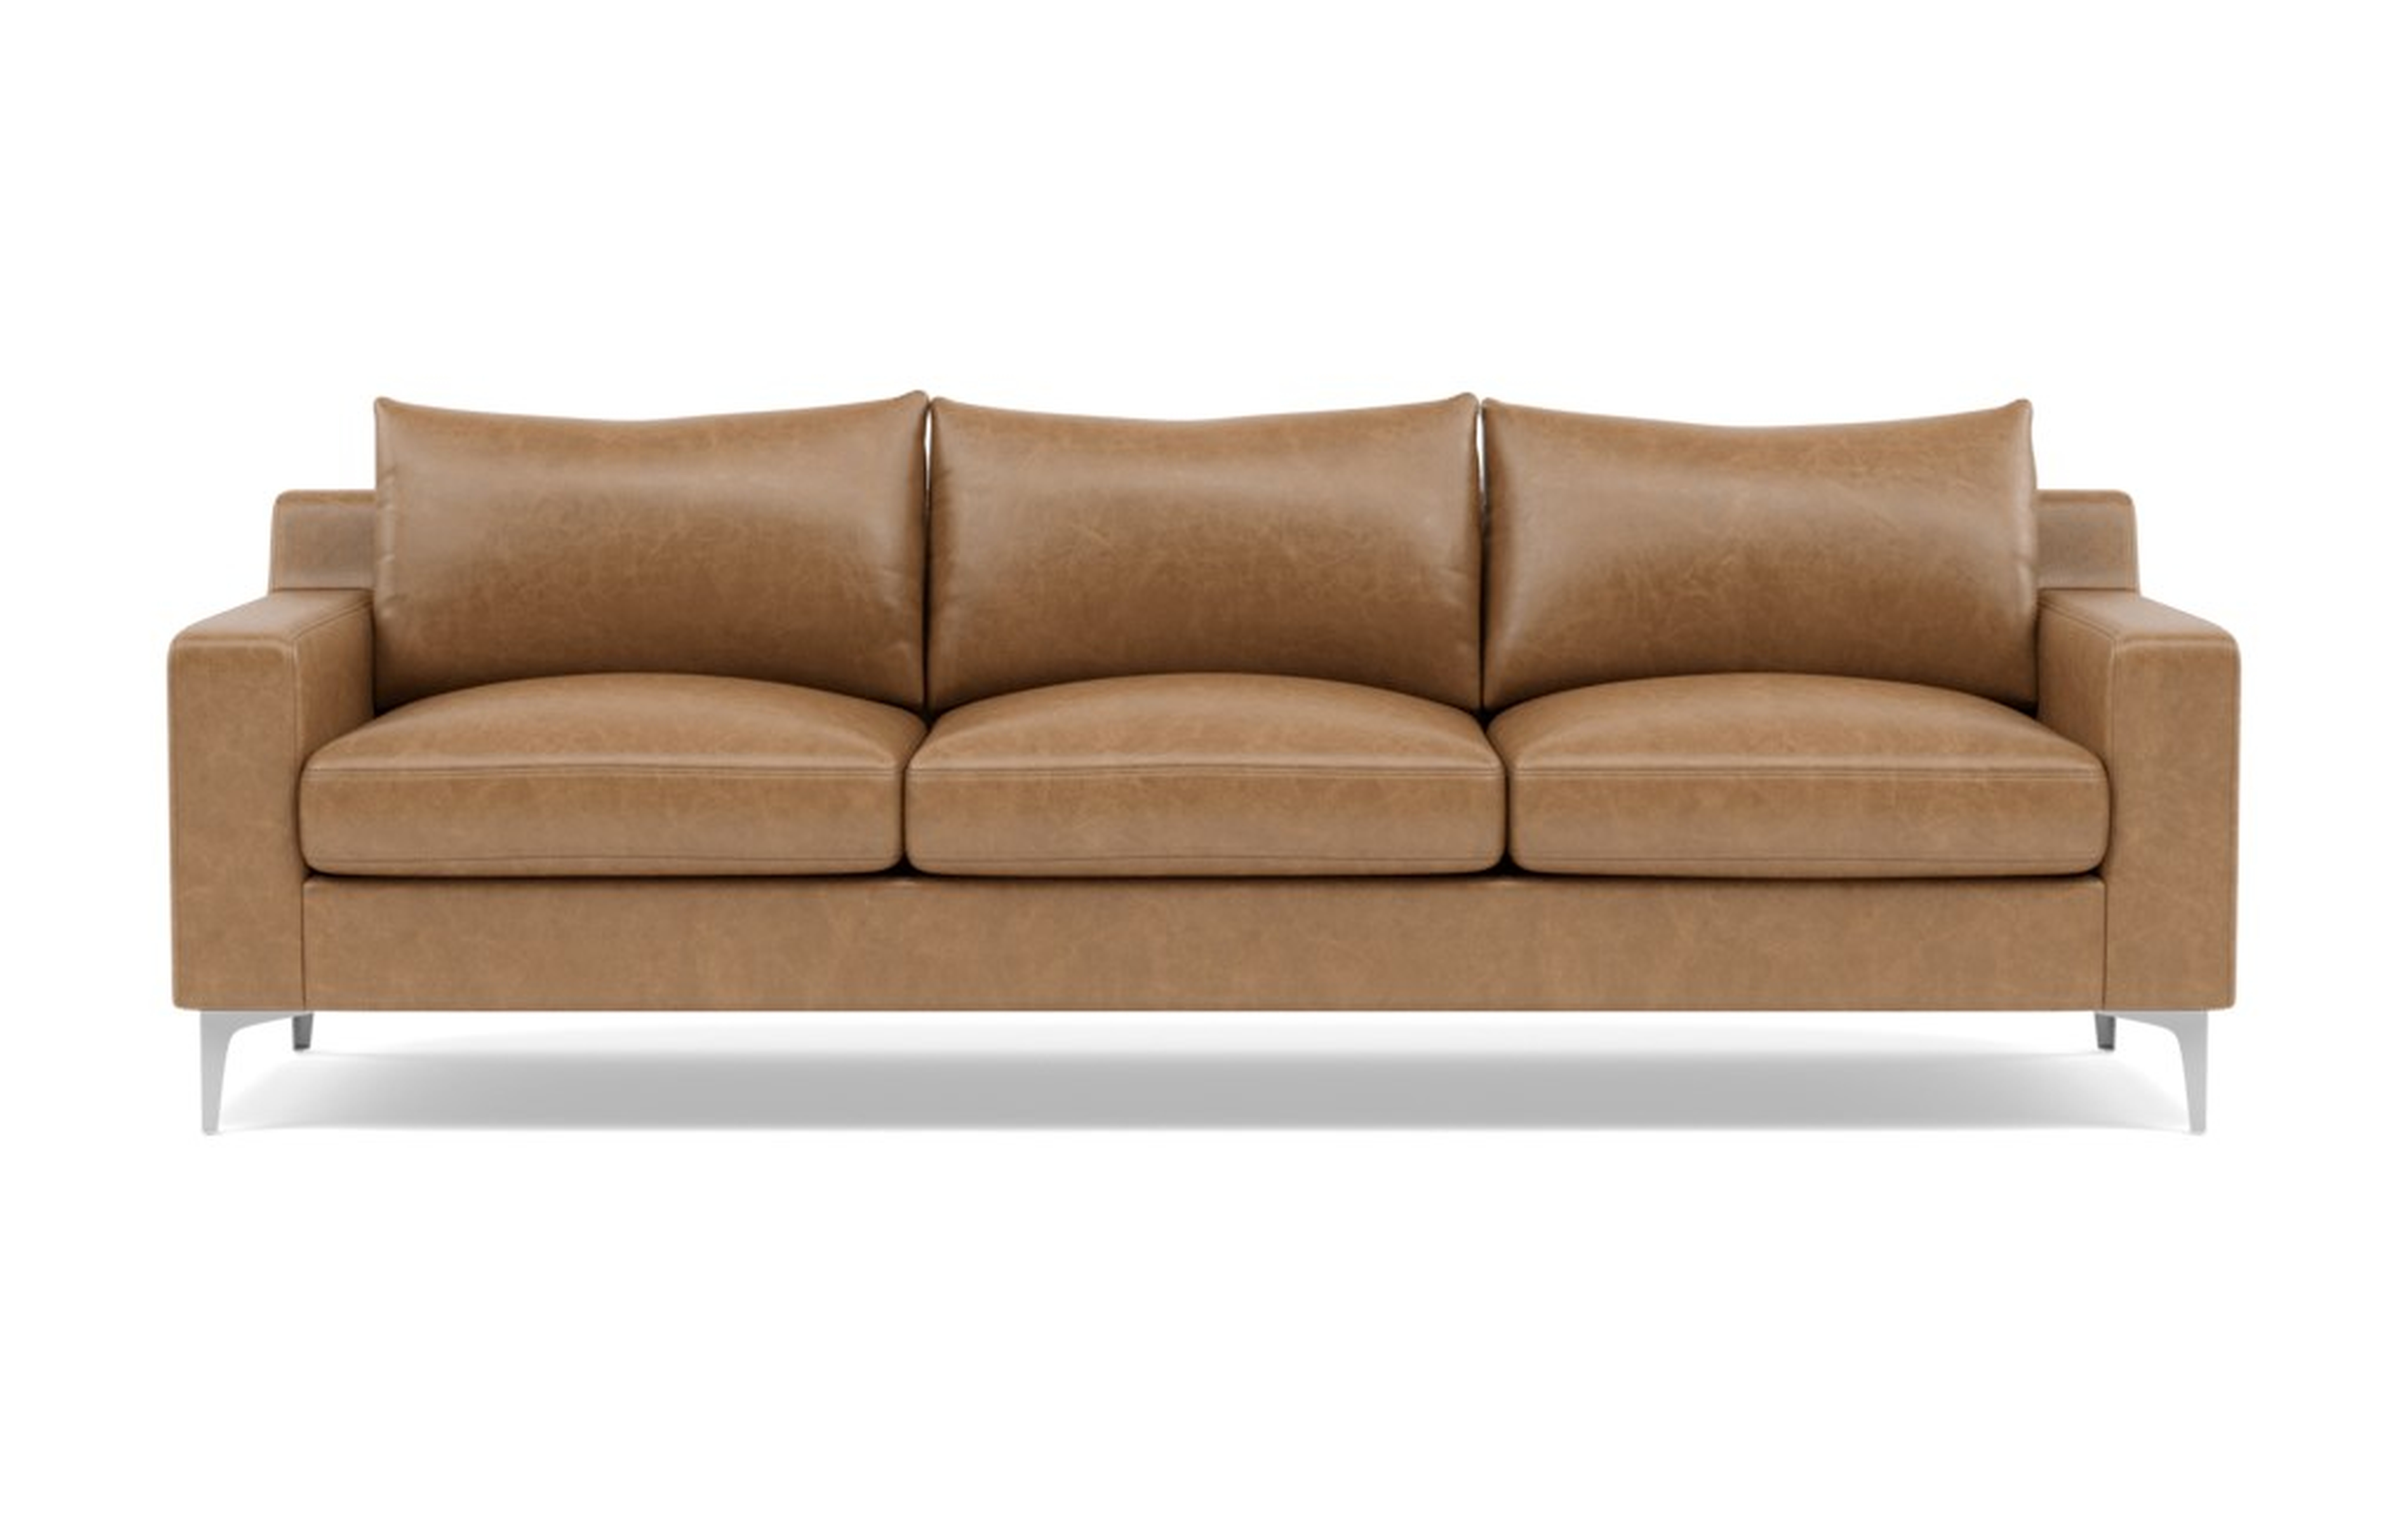 Sloan Leather Sofa with Brown Palomino Leather and chrome plated legs - Interior Define